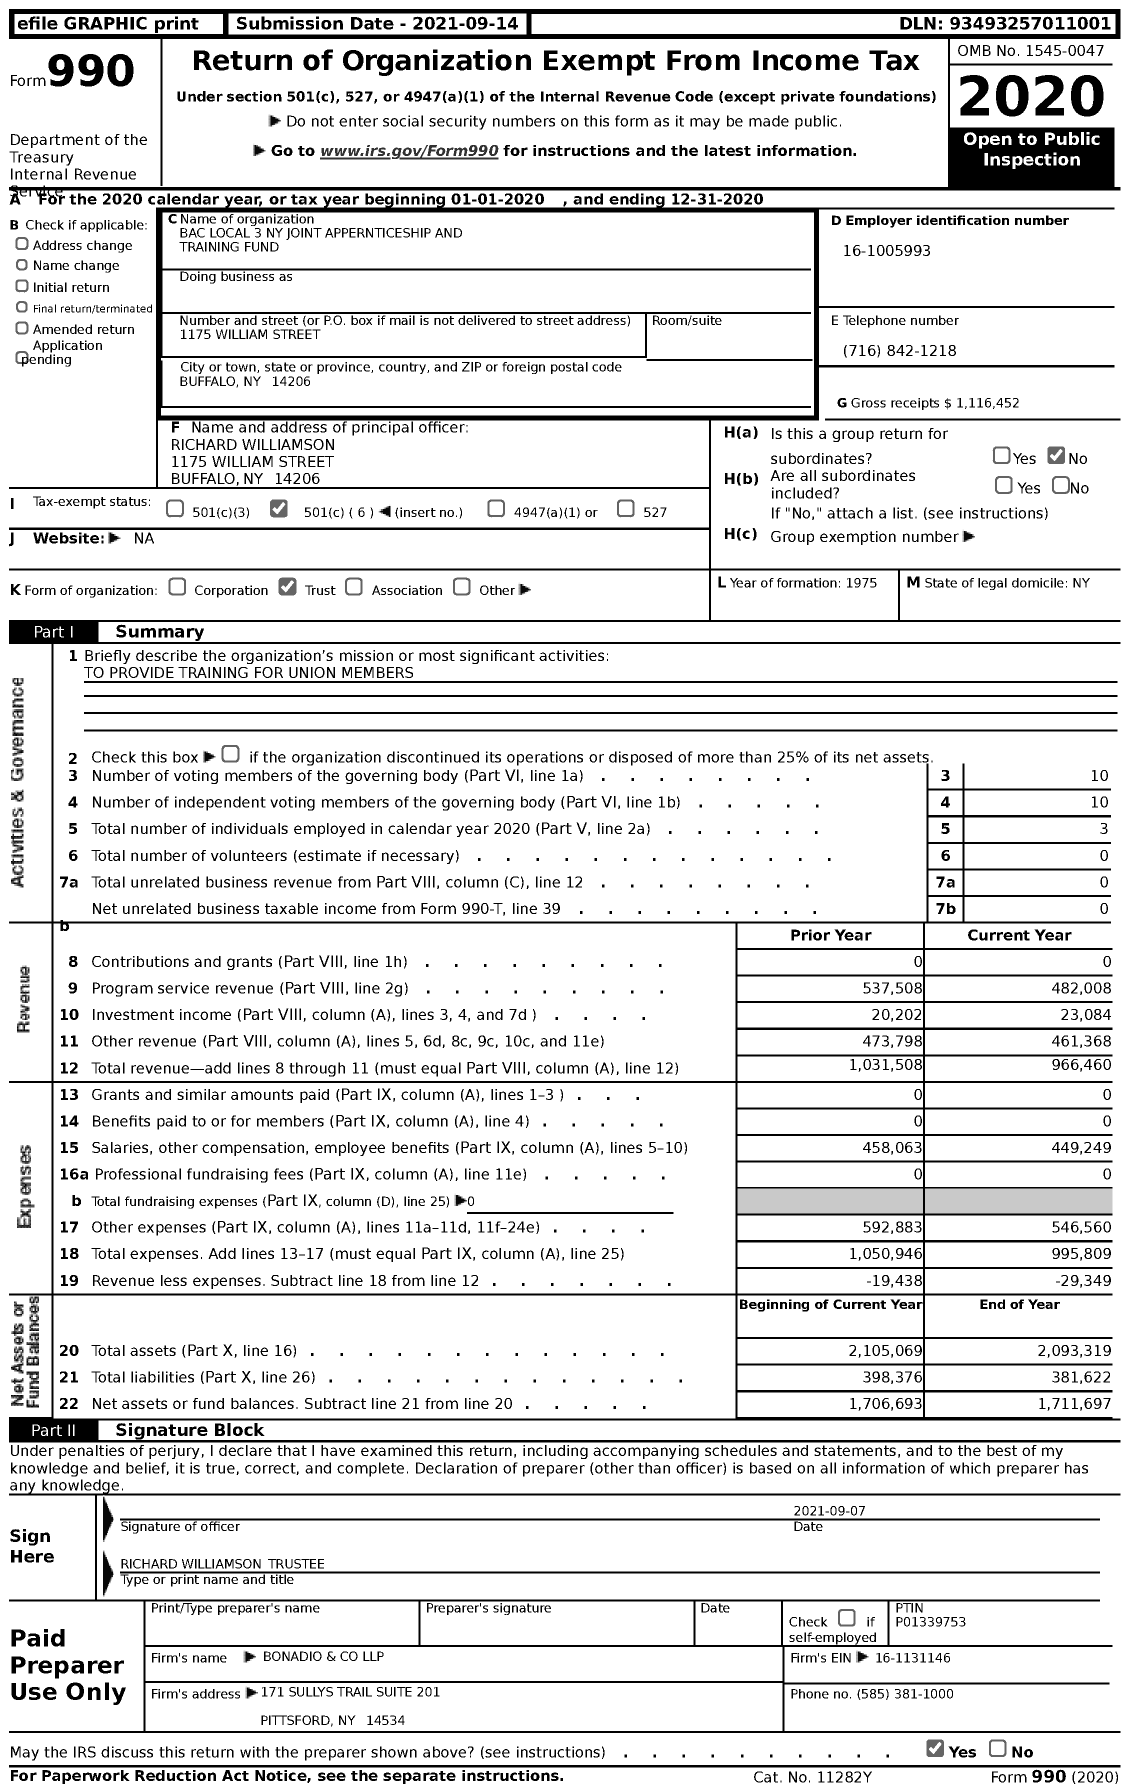 Image of first page of 2020 Form 990 for Bac Local 3 Ny Joint Apprenticeship and Training Fund